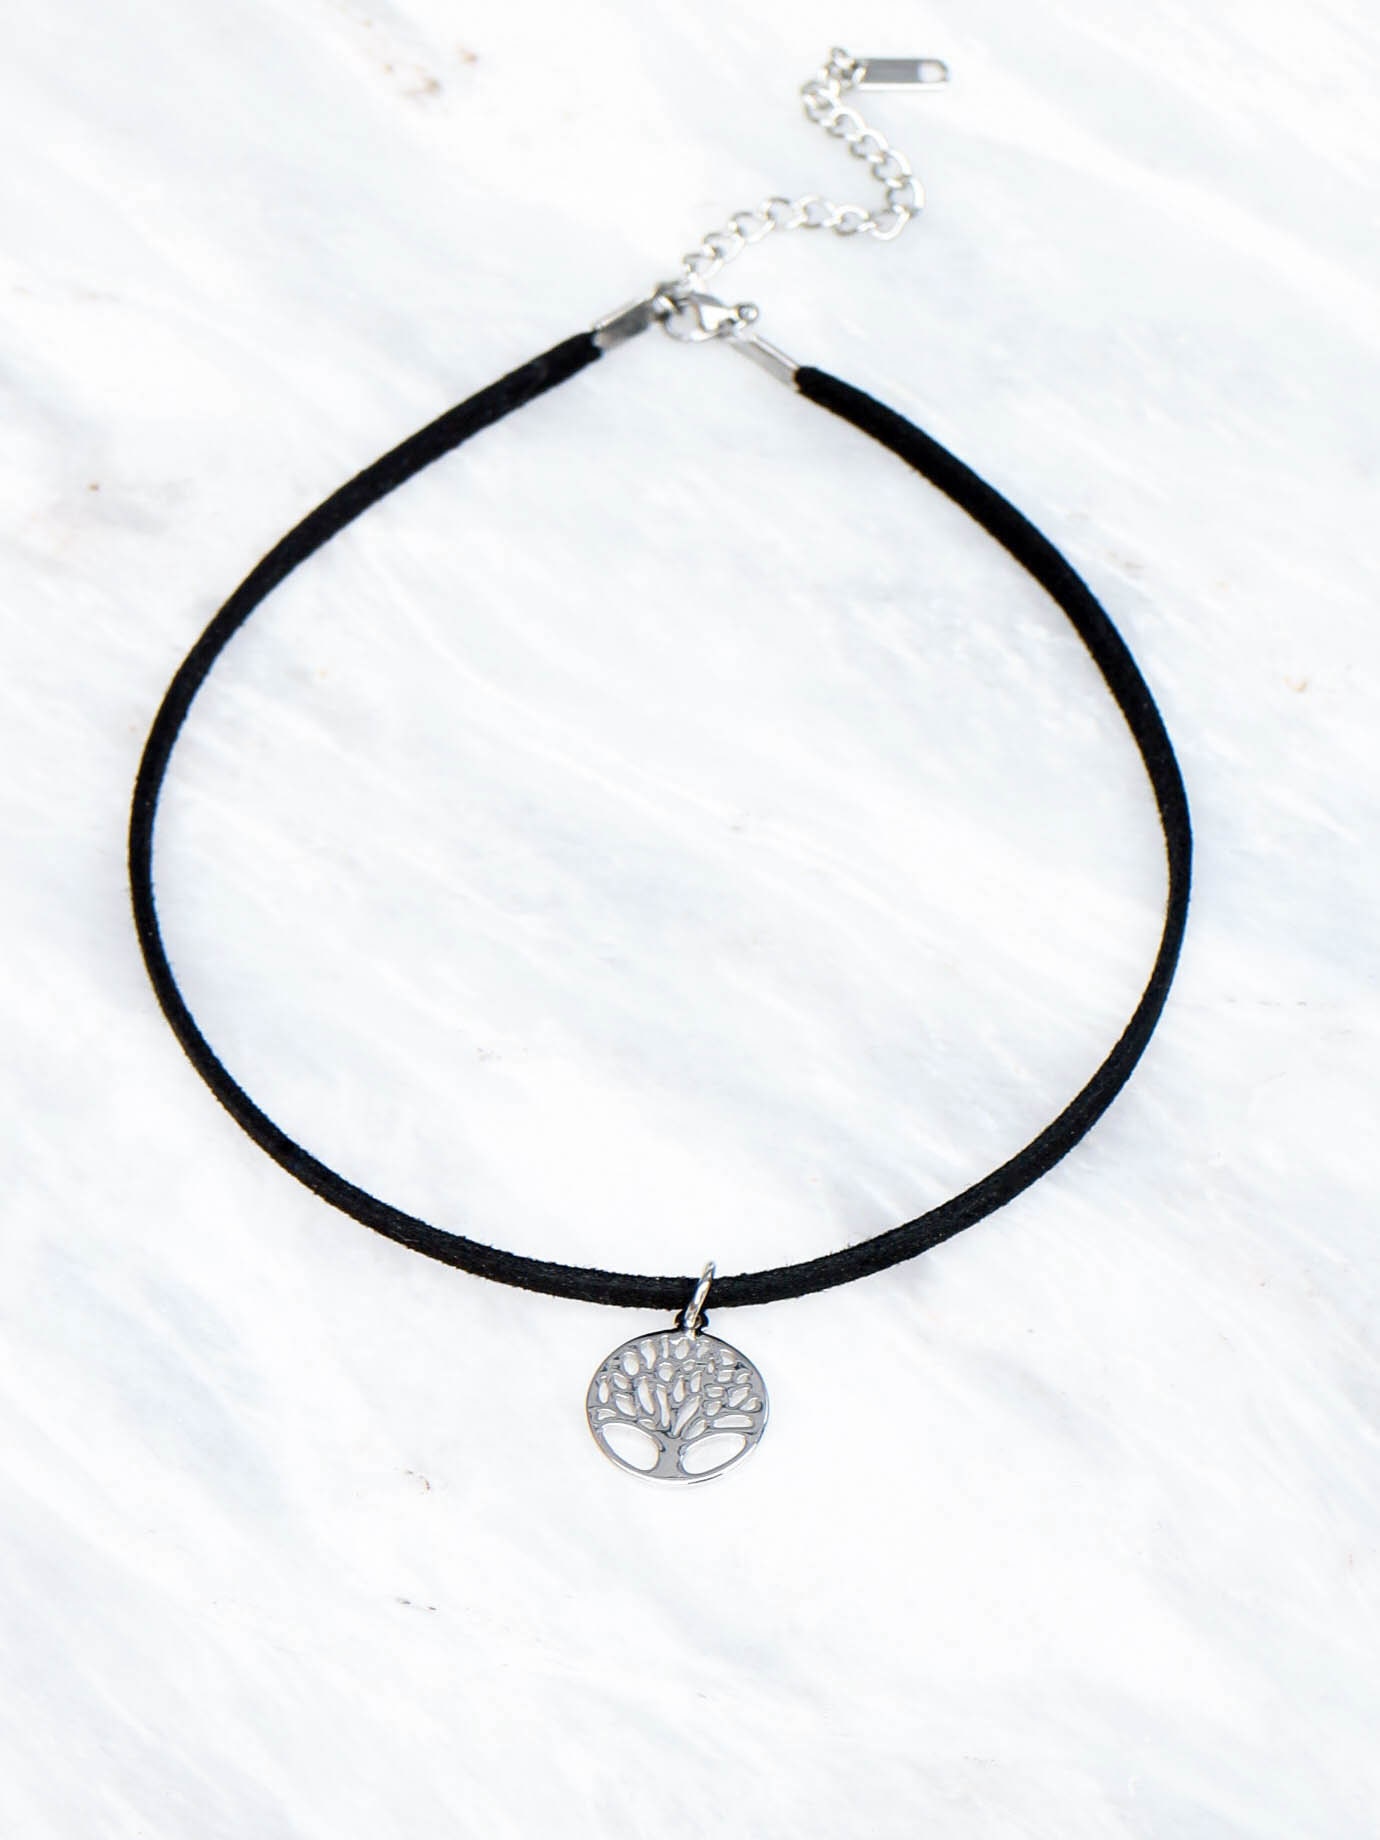 New UK Seller Black Leather Choker Necklace with Silver Tree of Life Charm 